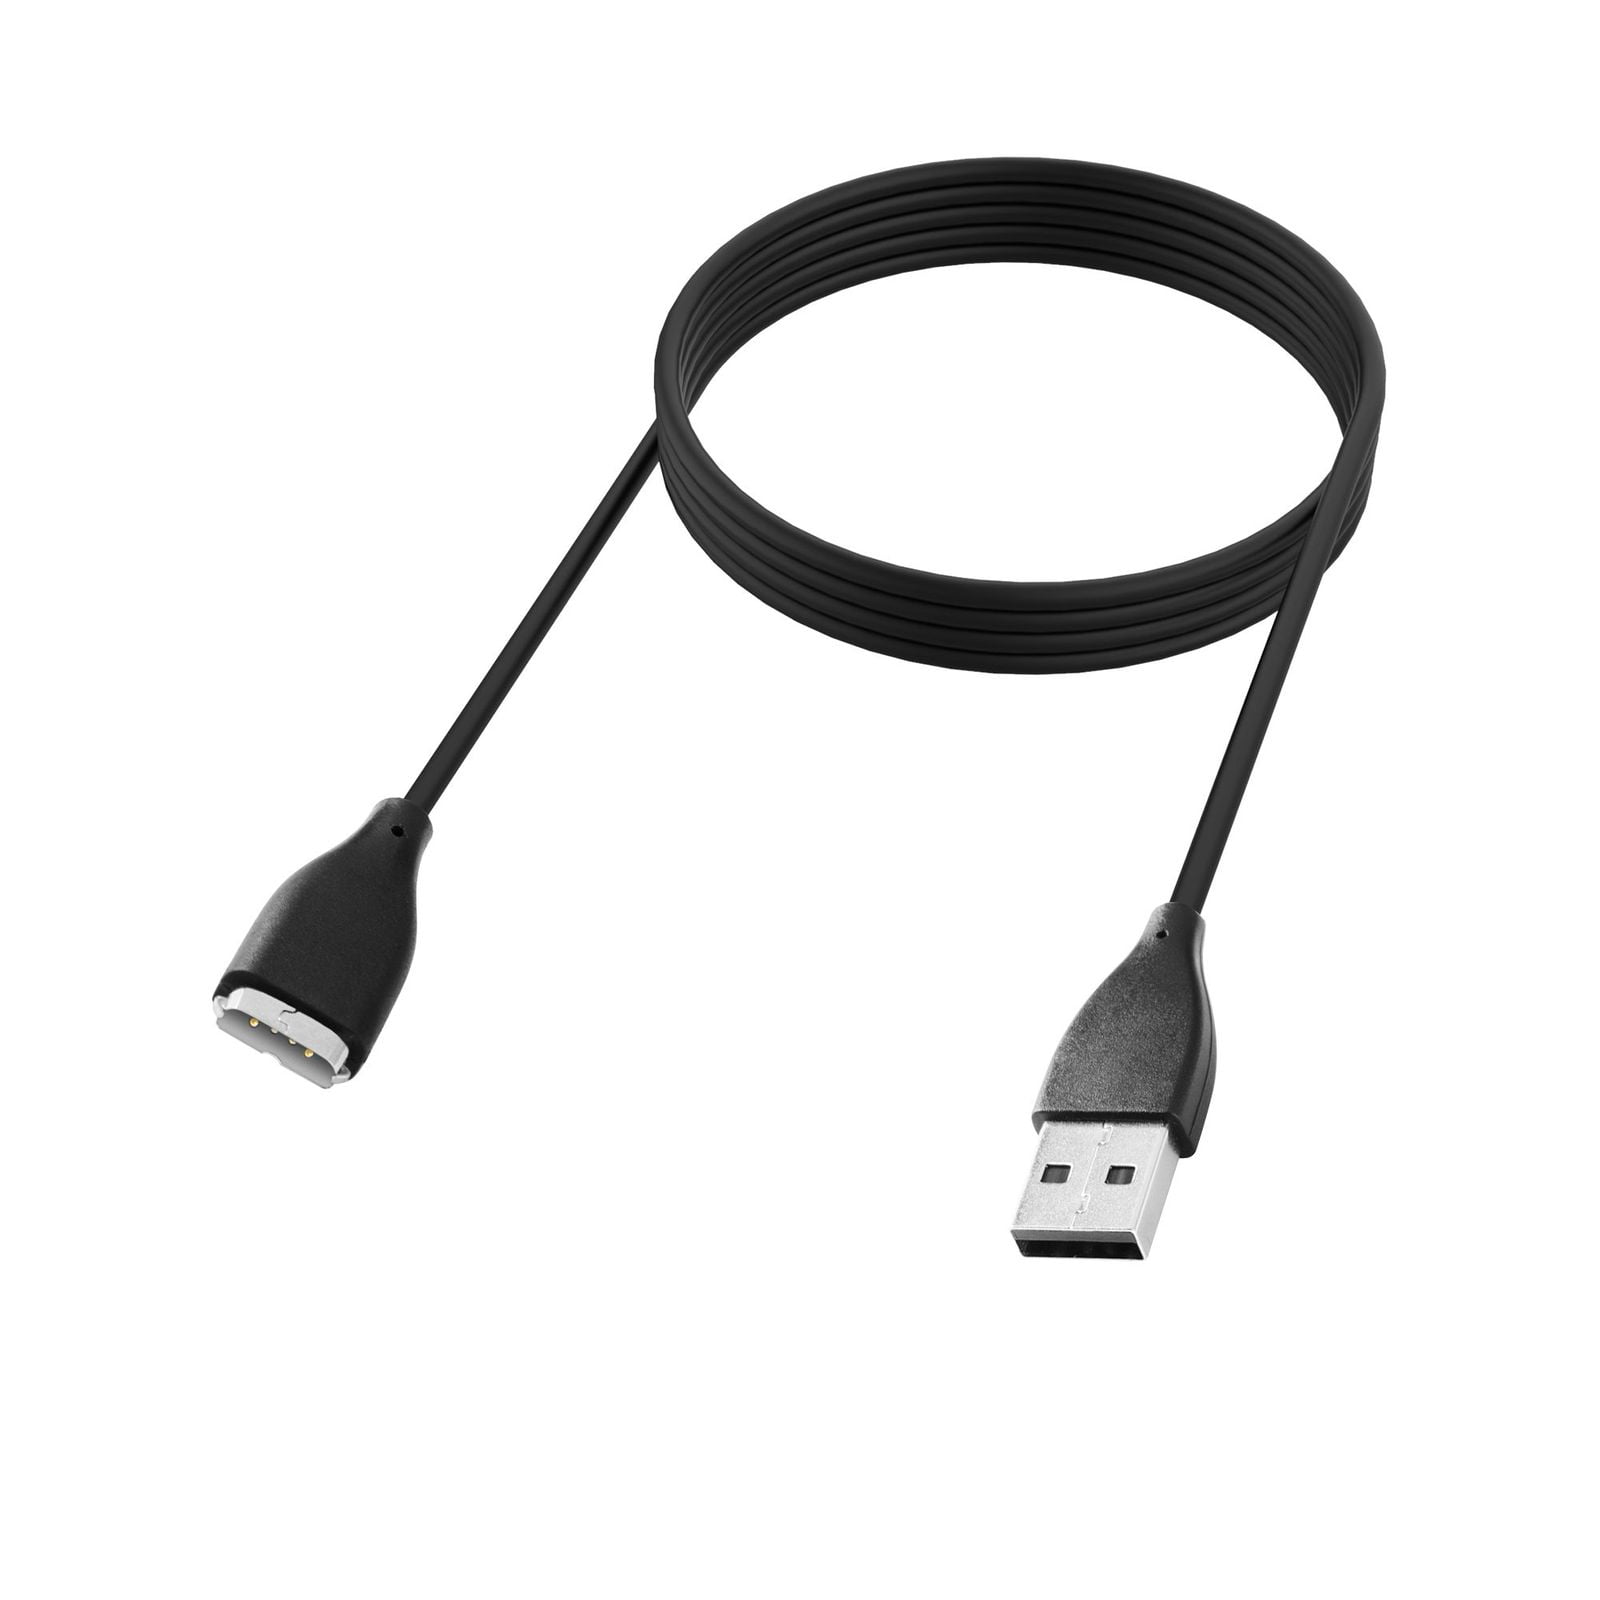 Smart Band USB Charger Charging Cable For Fitbit Alta Blaze HR Surge Flex Force 